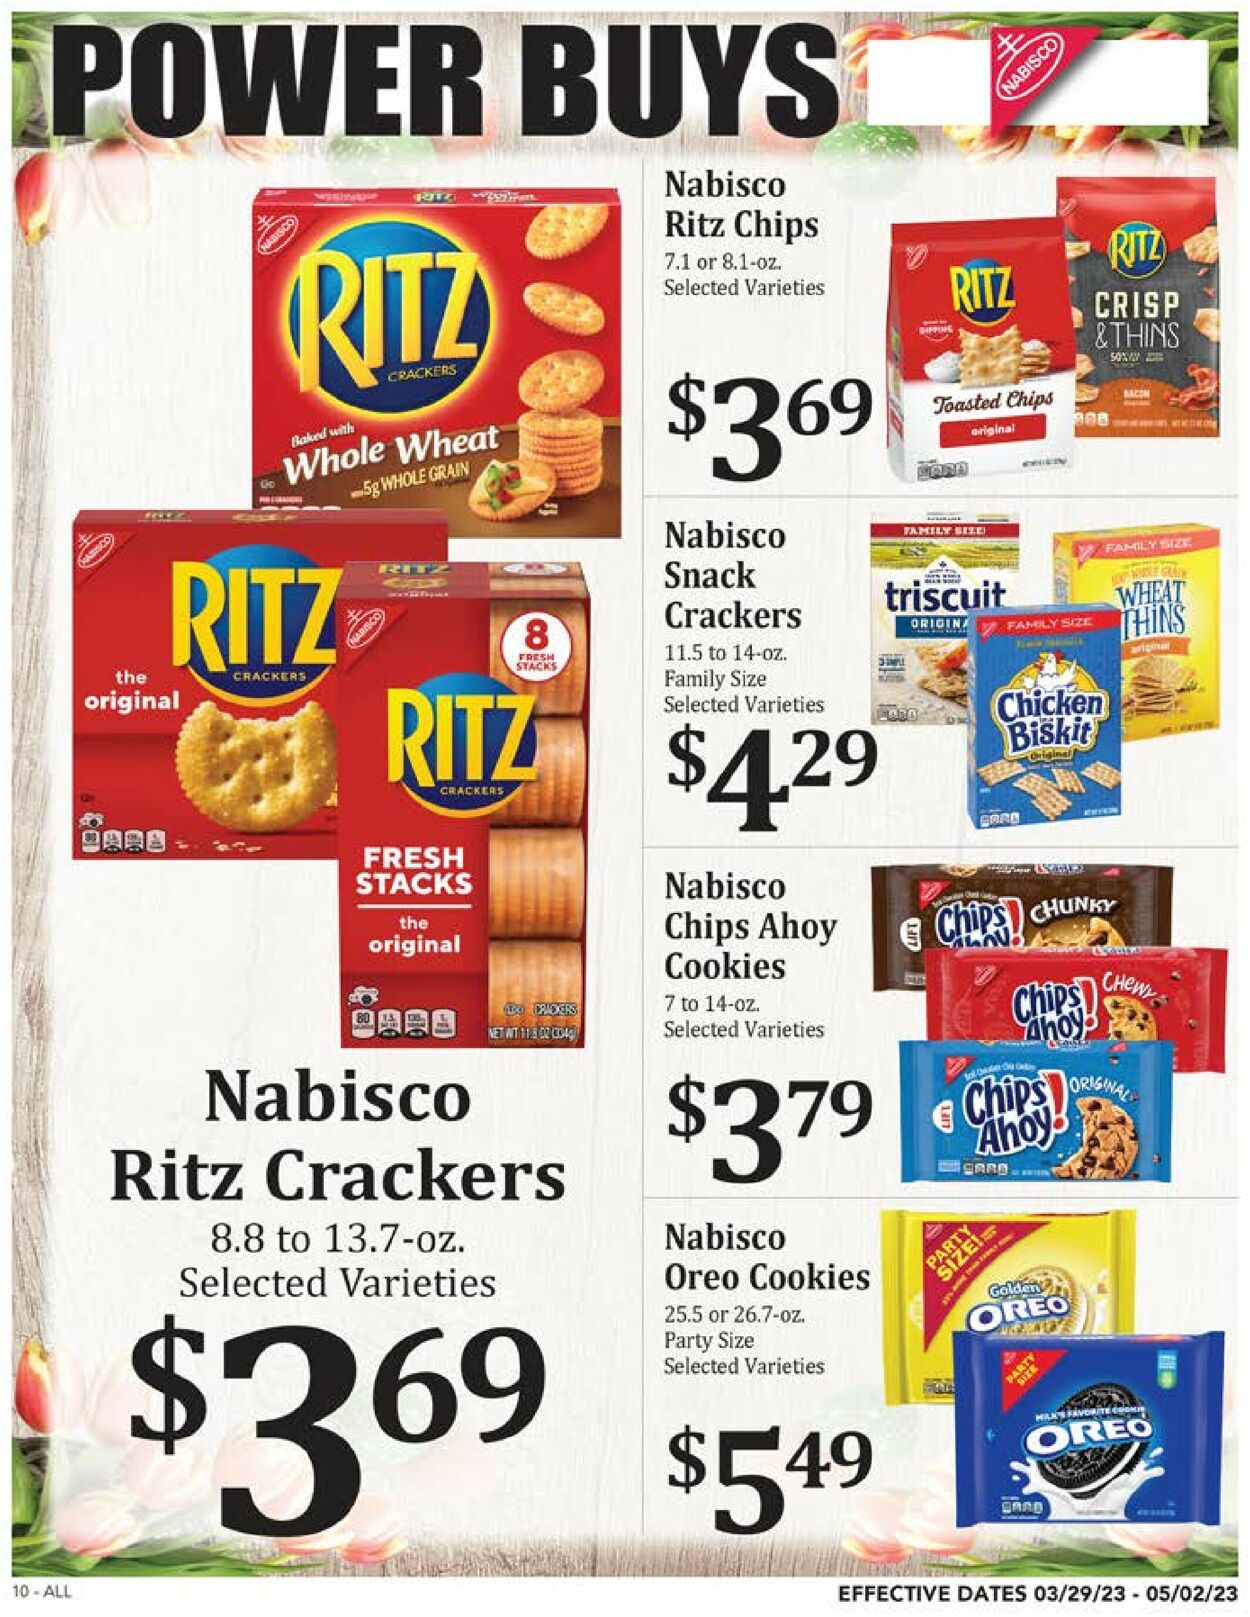 Rosauers Ad from 03/29/2023